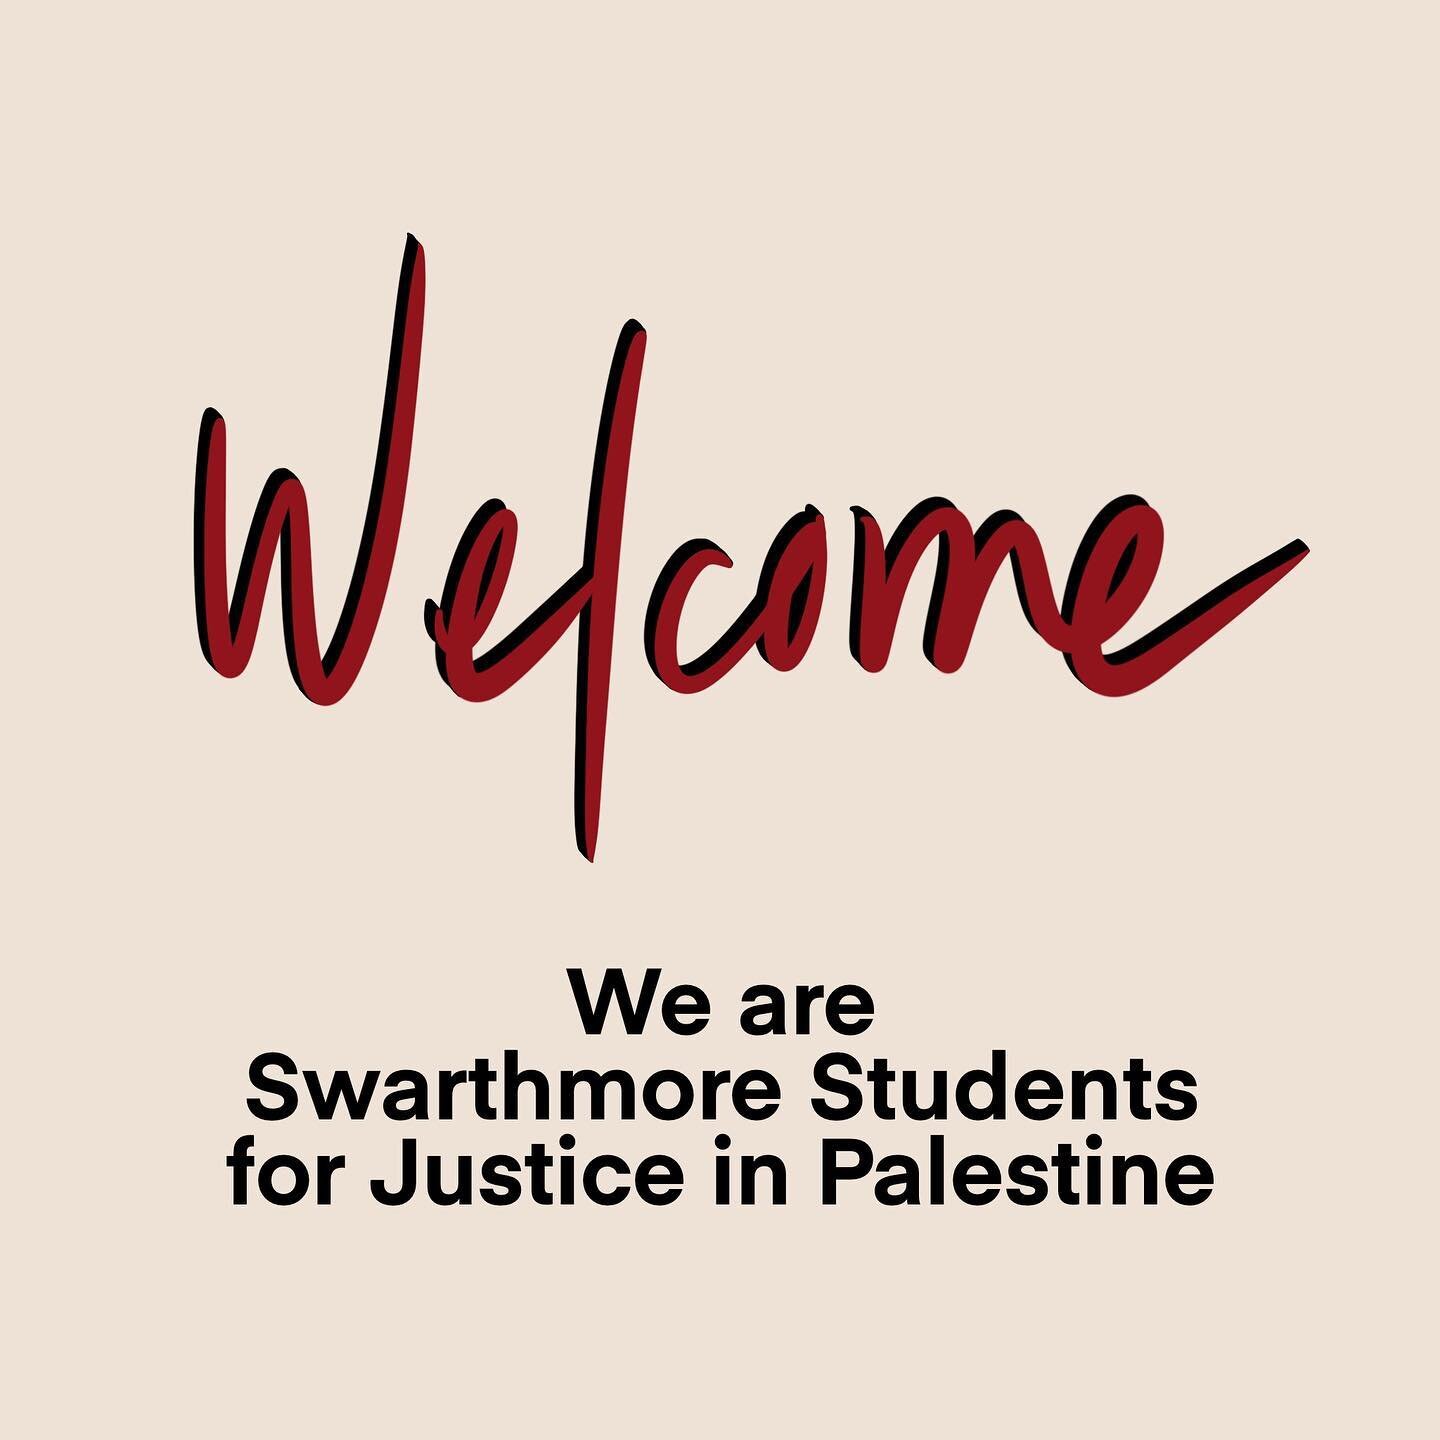 Swarthmore Students for Justice in Palestine is a group advocating for Palestinian rights against the Israeli occupation. We focus on educational and cultural events and are currently running a BDS campaign calling on the College to divest from Israe